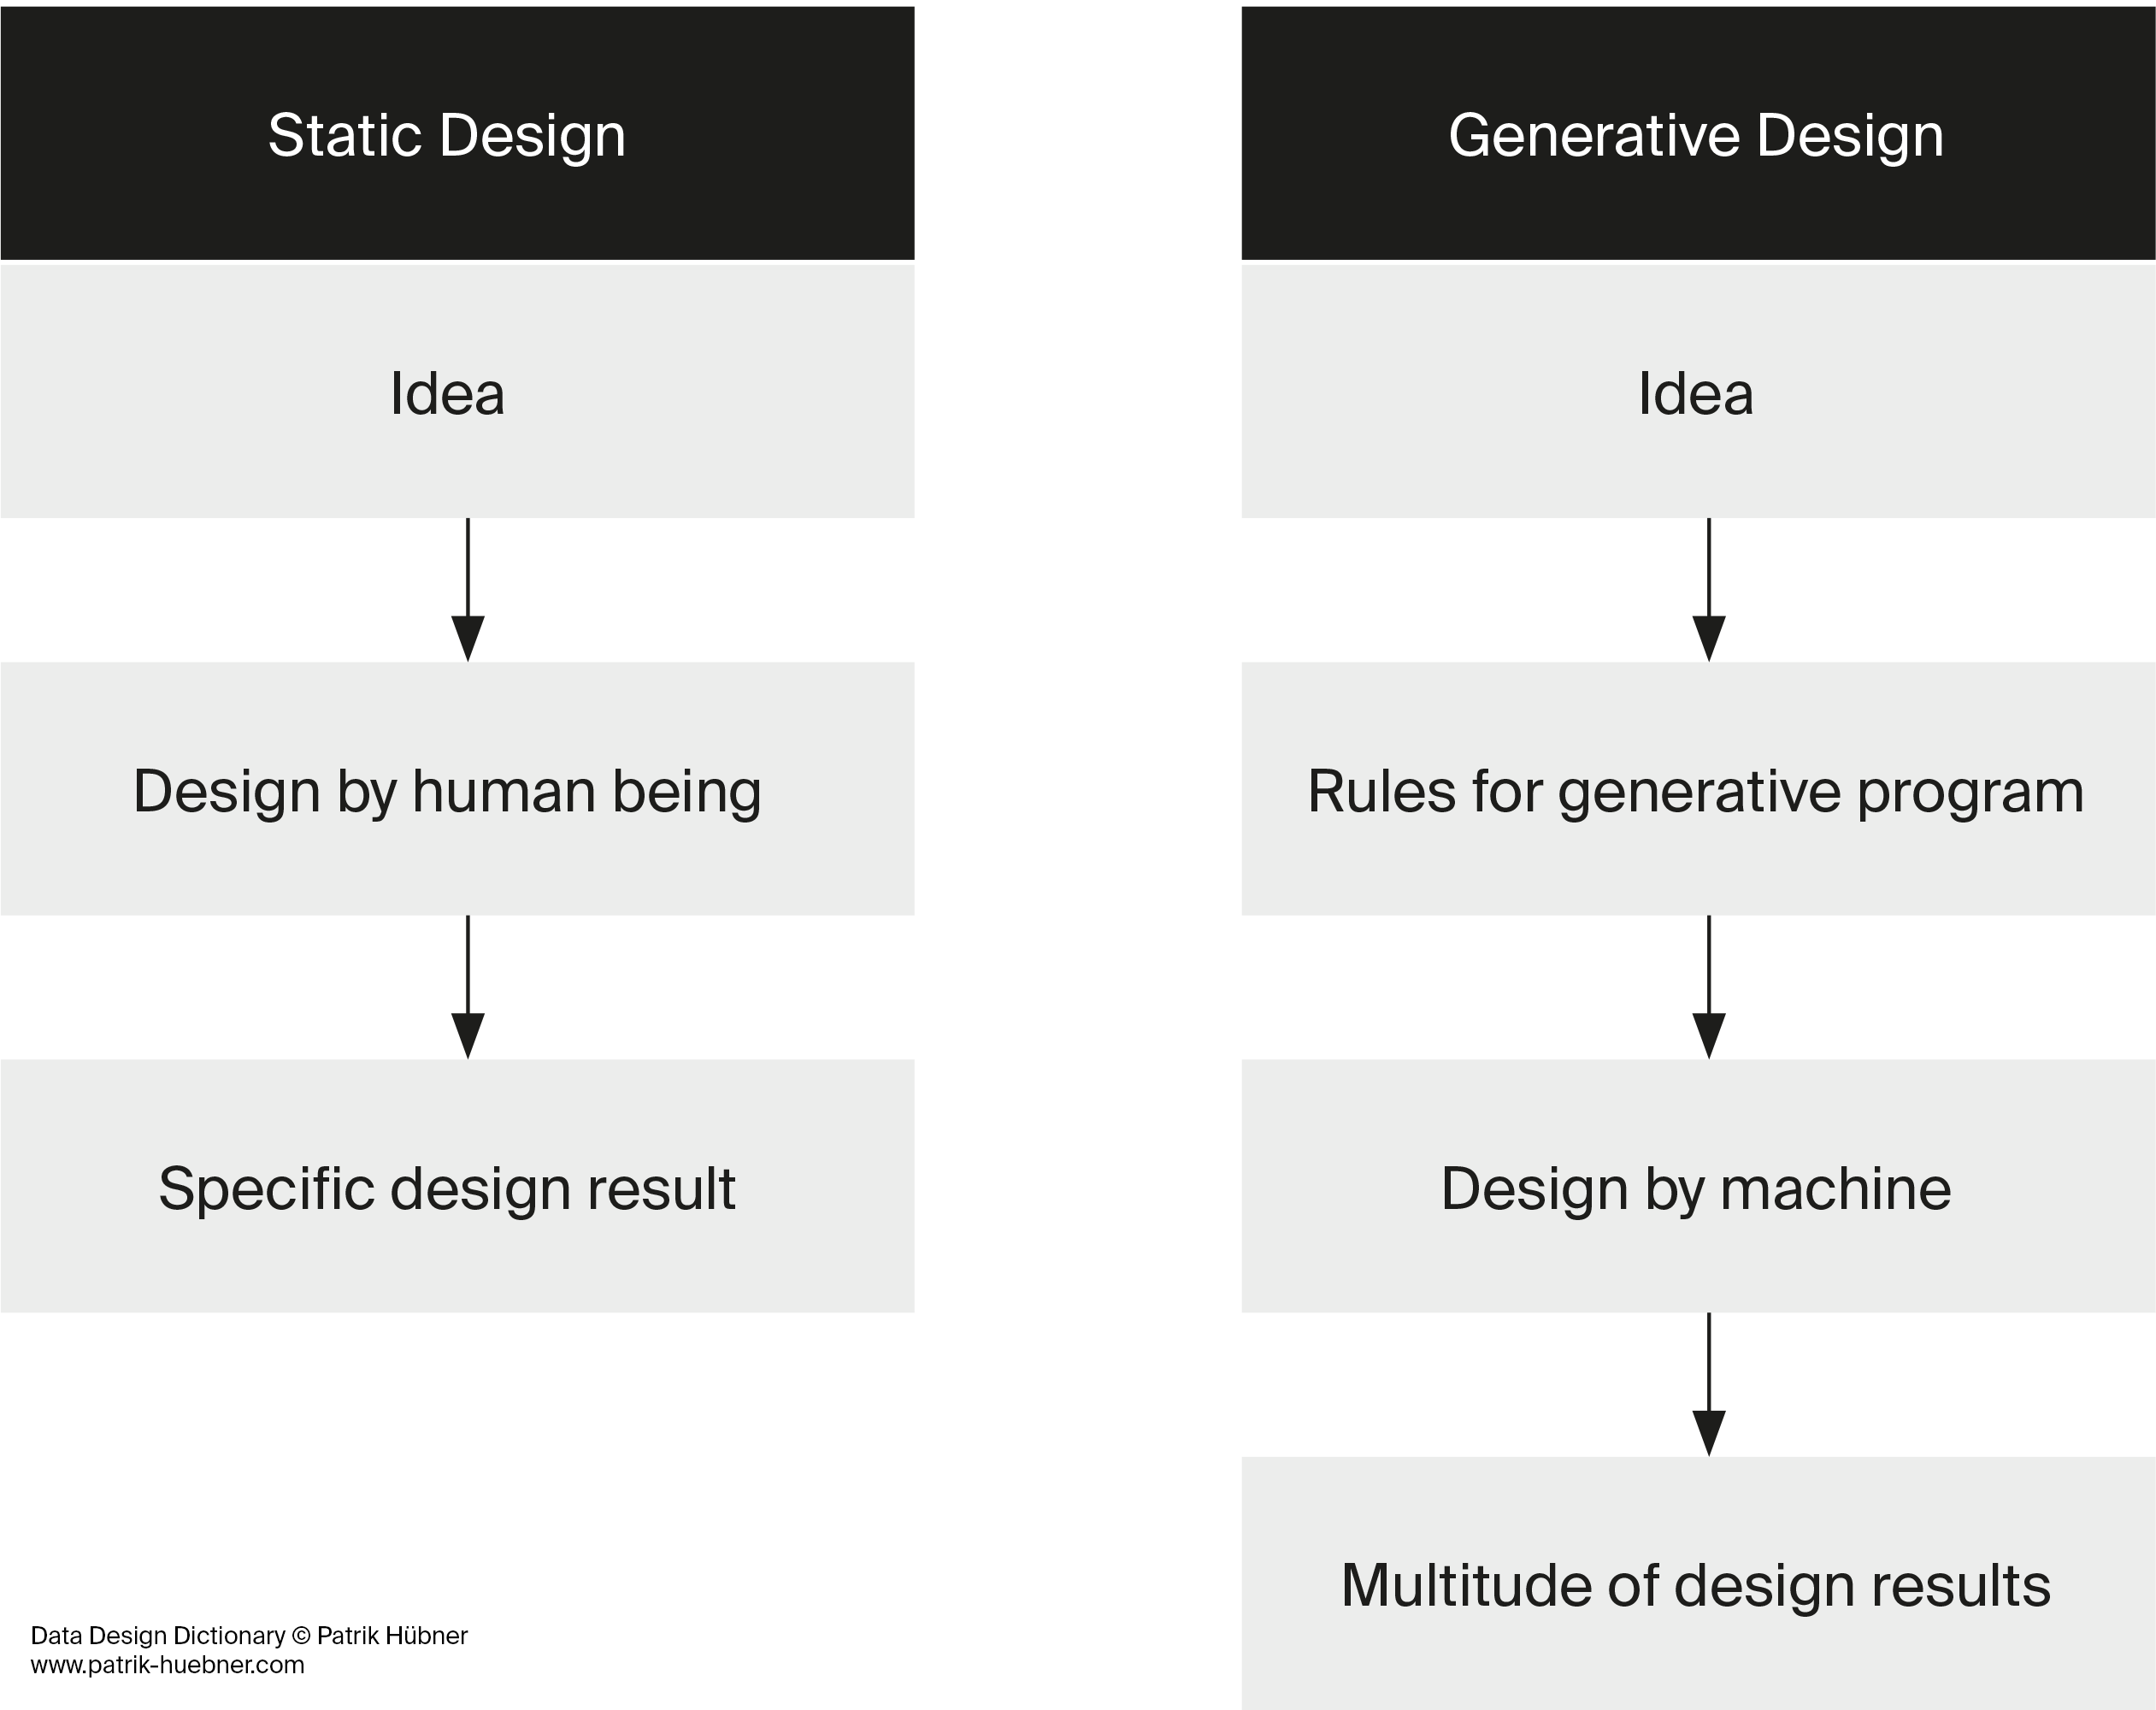 Generative design signifies a paradigm shift in design: Instead of working directly on a specific design result, generative designers take a different approach. They first deal with the idea in detail so that they can then describe and express it as a program. It is then the machine that uses this program to produce a variety of forms of the idea without the creative person having to intervene.